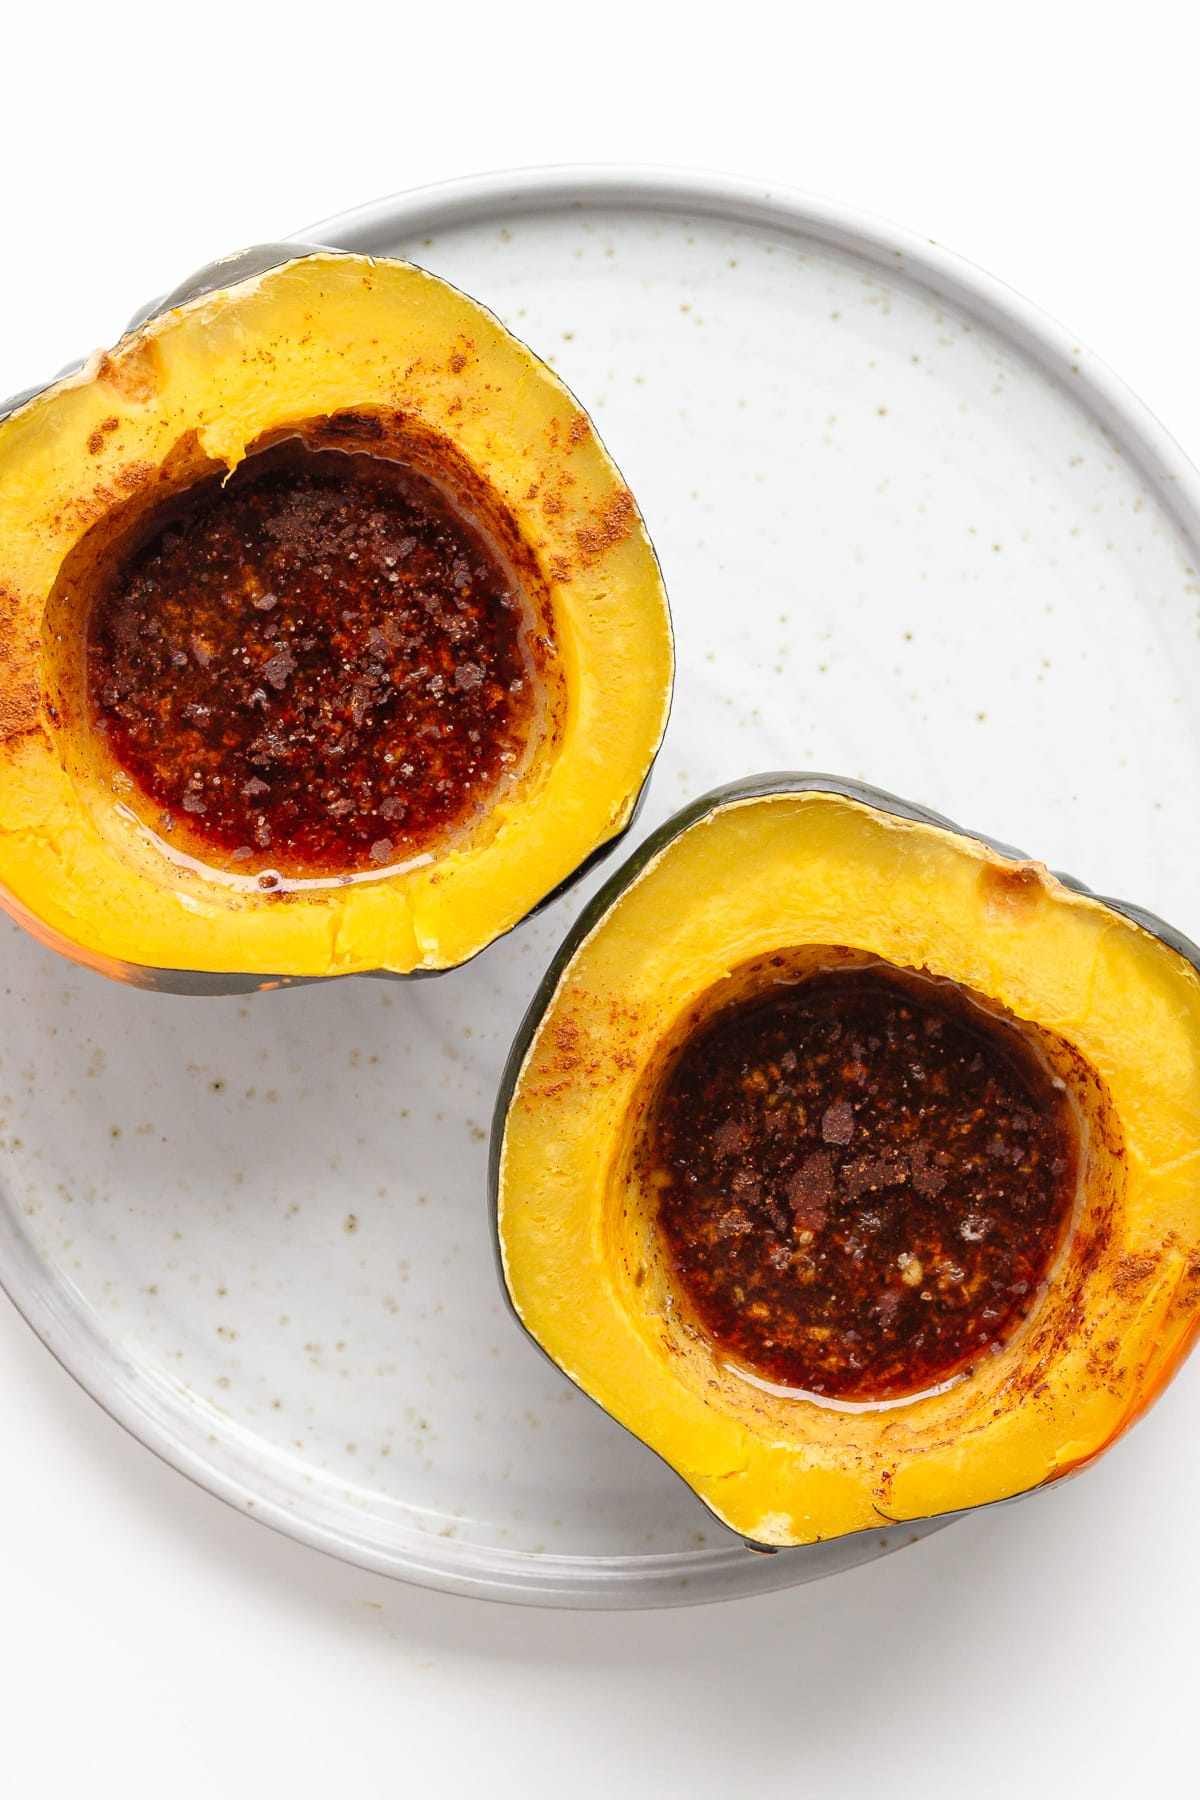 Two cooked acorn squash halves on a serving plate filled with a butter, brown sugar and cinnamon topping.